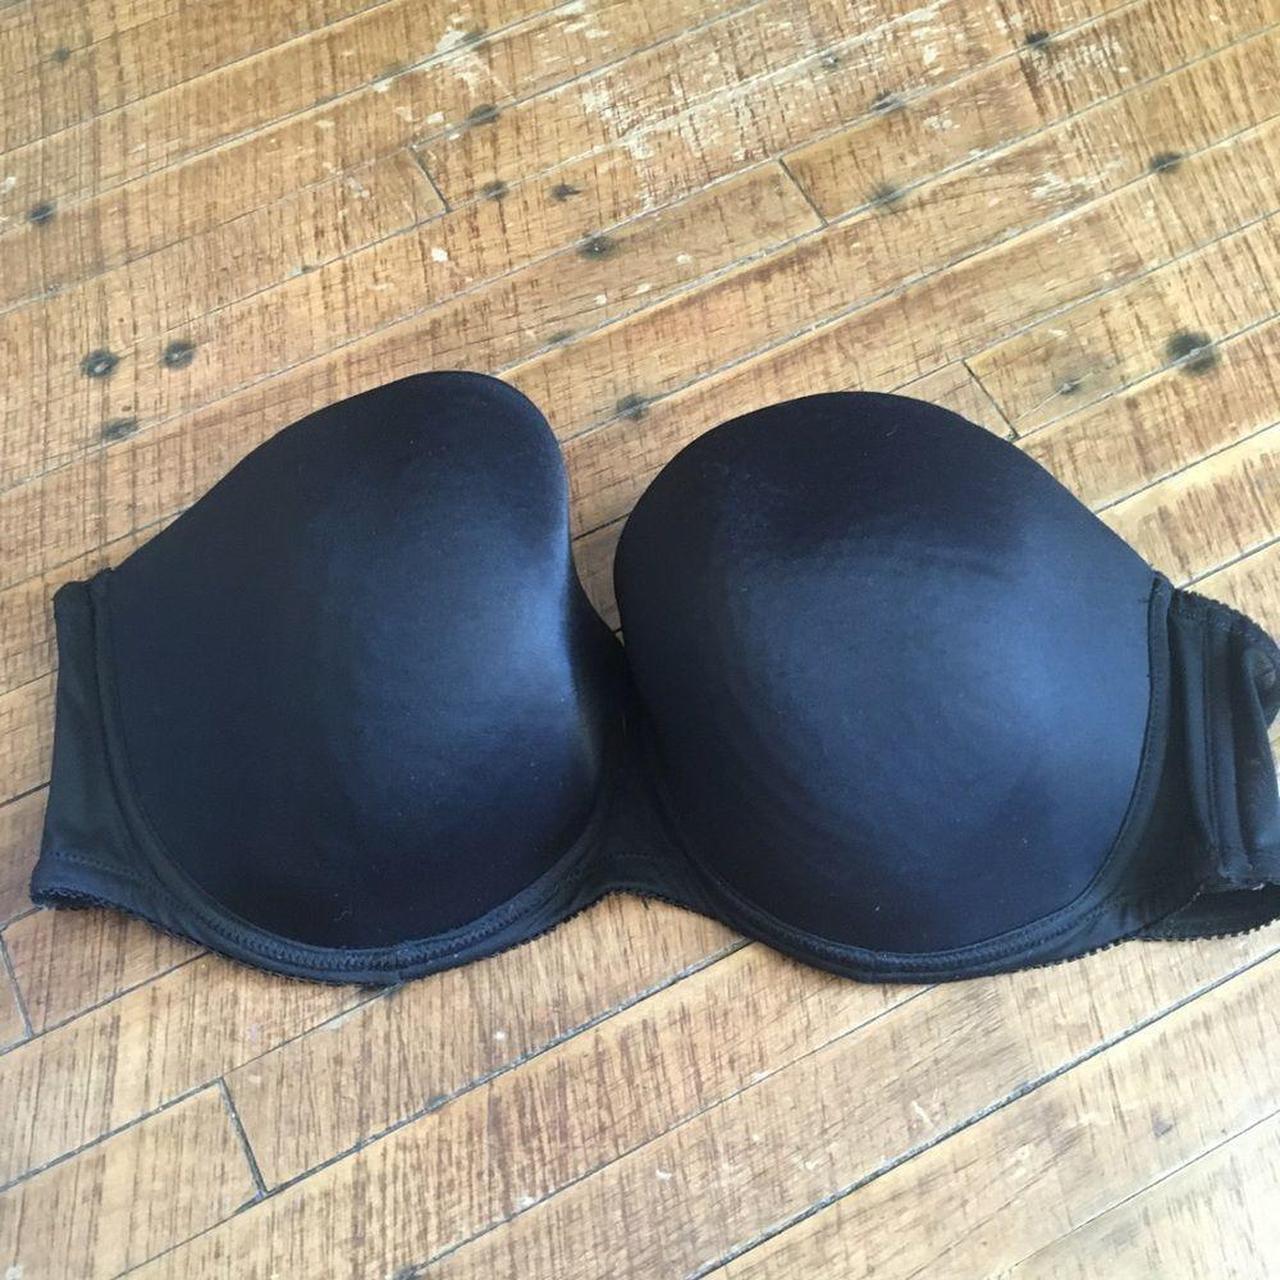 Black strapless bra with underwire. Loops for - Depop